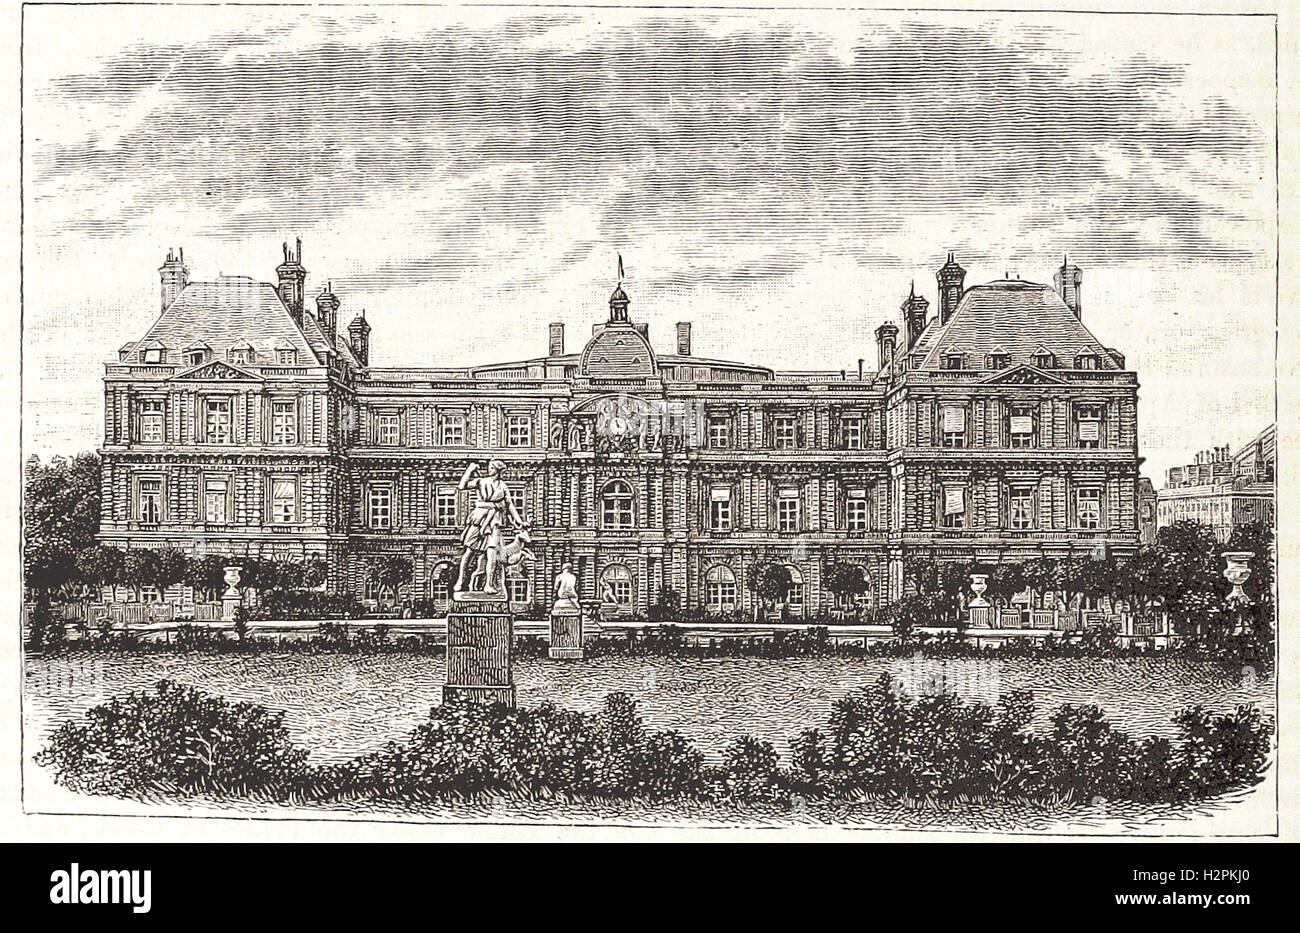 THE PALAIS DE LUXEMBOURG, PARIS - from 'Cassell's Illustrated Universal History' - 1882 Stock Photo